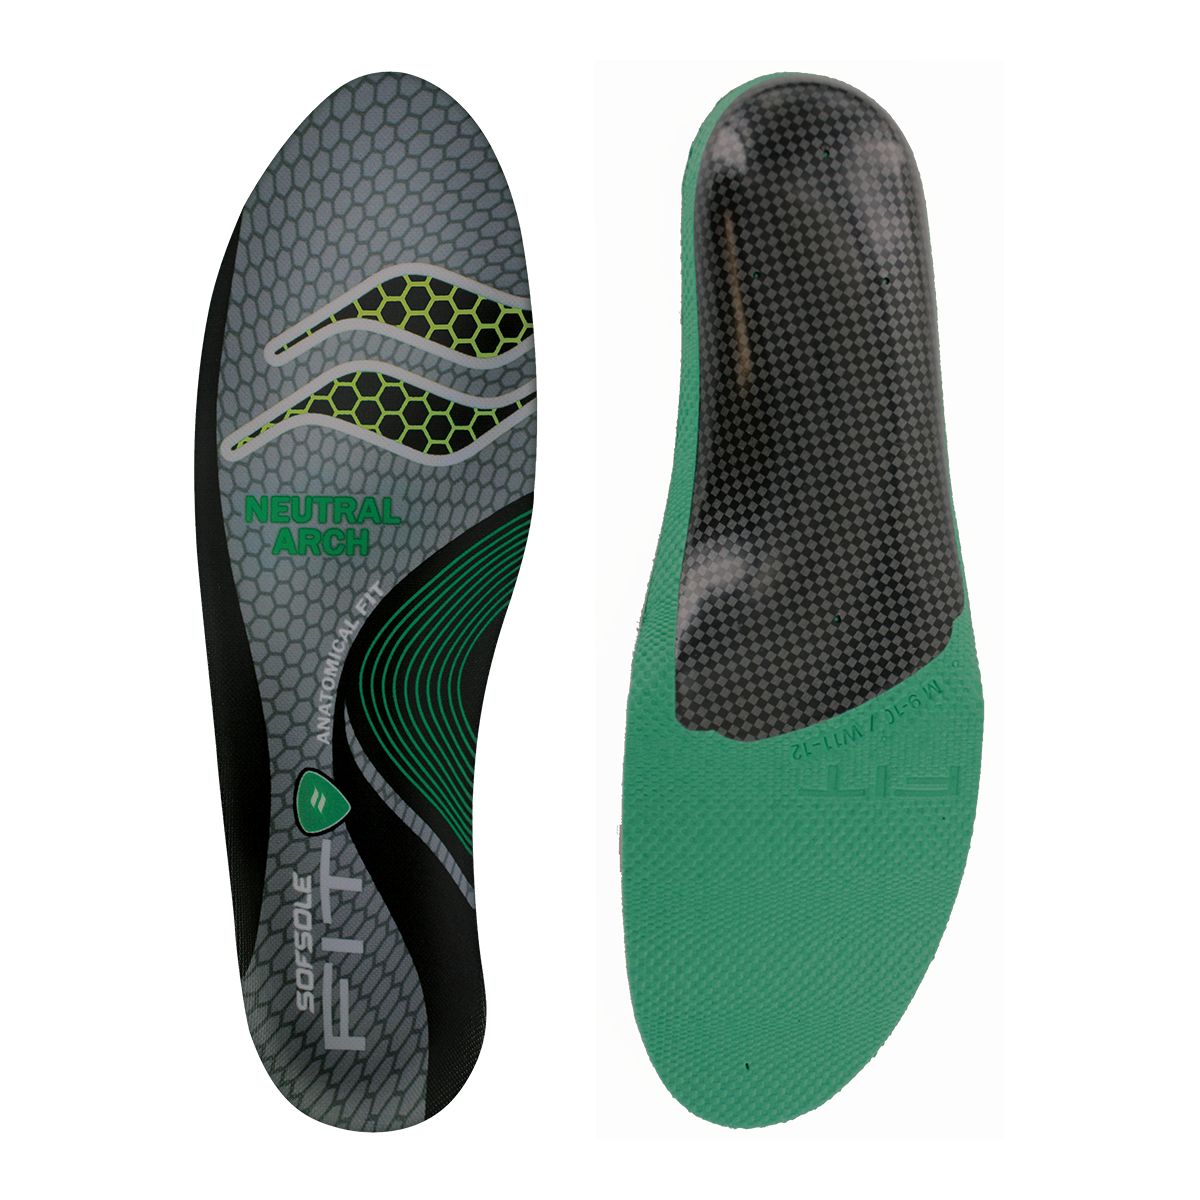 Image of Sof Sole FIT Neutral Arch Insoles Shoe Inserts